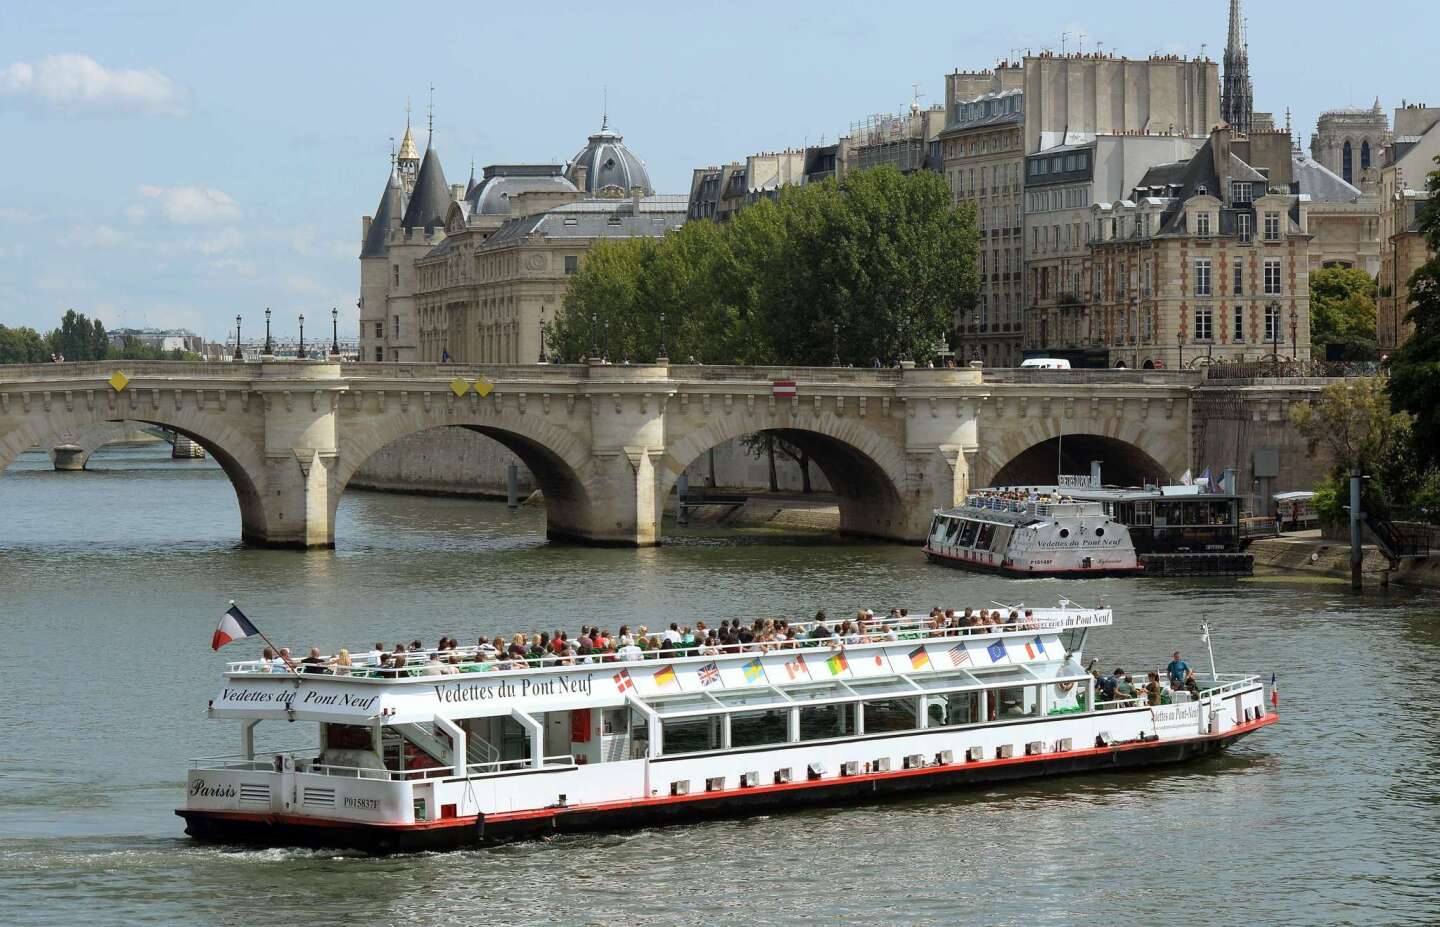 Despite its name, the Pont Neuf ("New Bridge") is the oldest standing bridge on the Seine River, and it has been an assignation point for lovers since the first stone was laid in 1578. The bridge is at its most alluring at sunset. The best part? It's totally free!